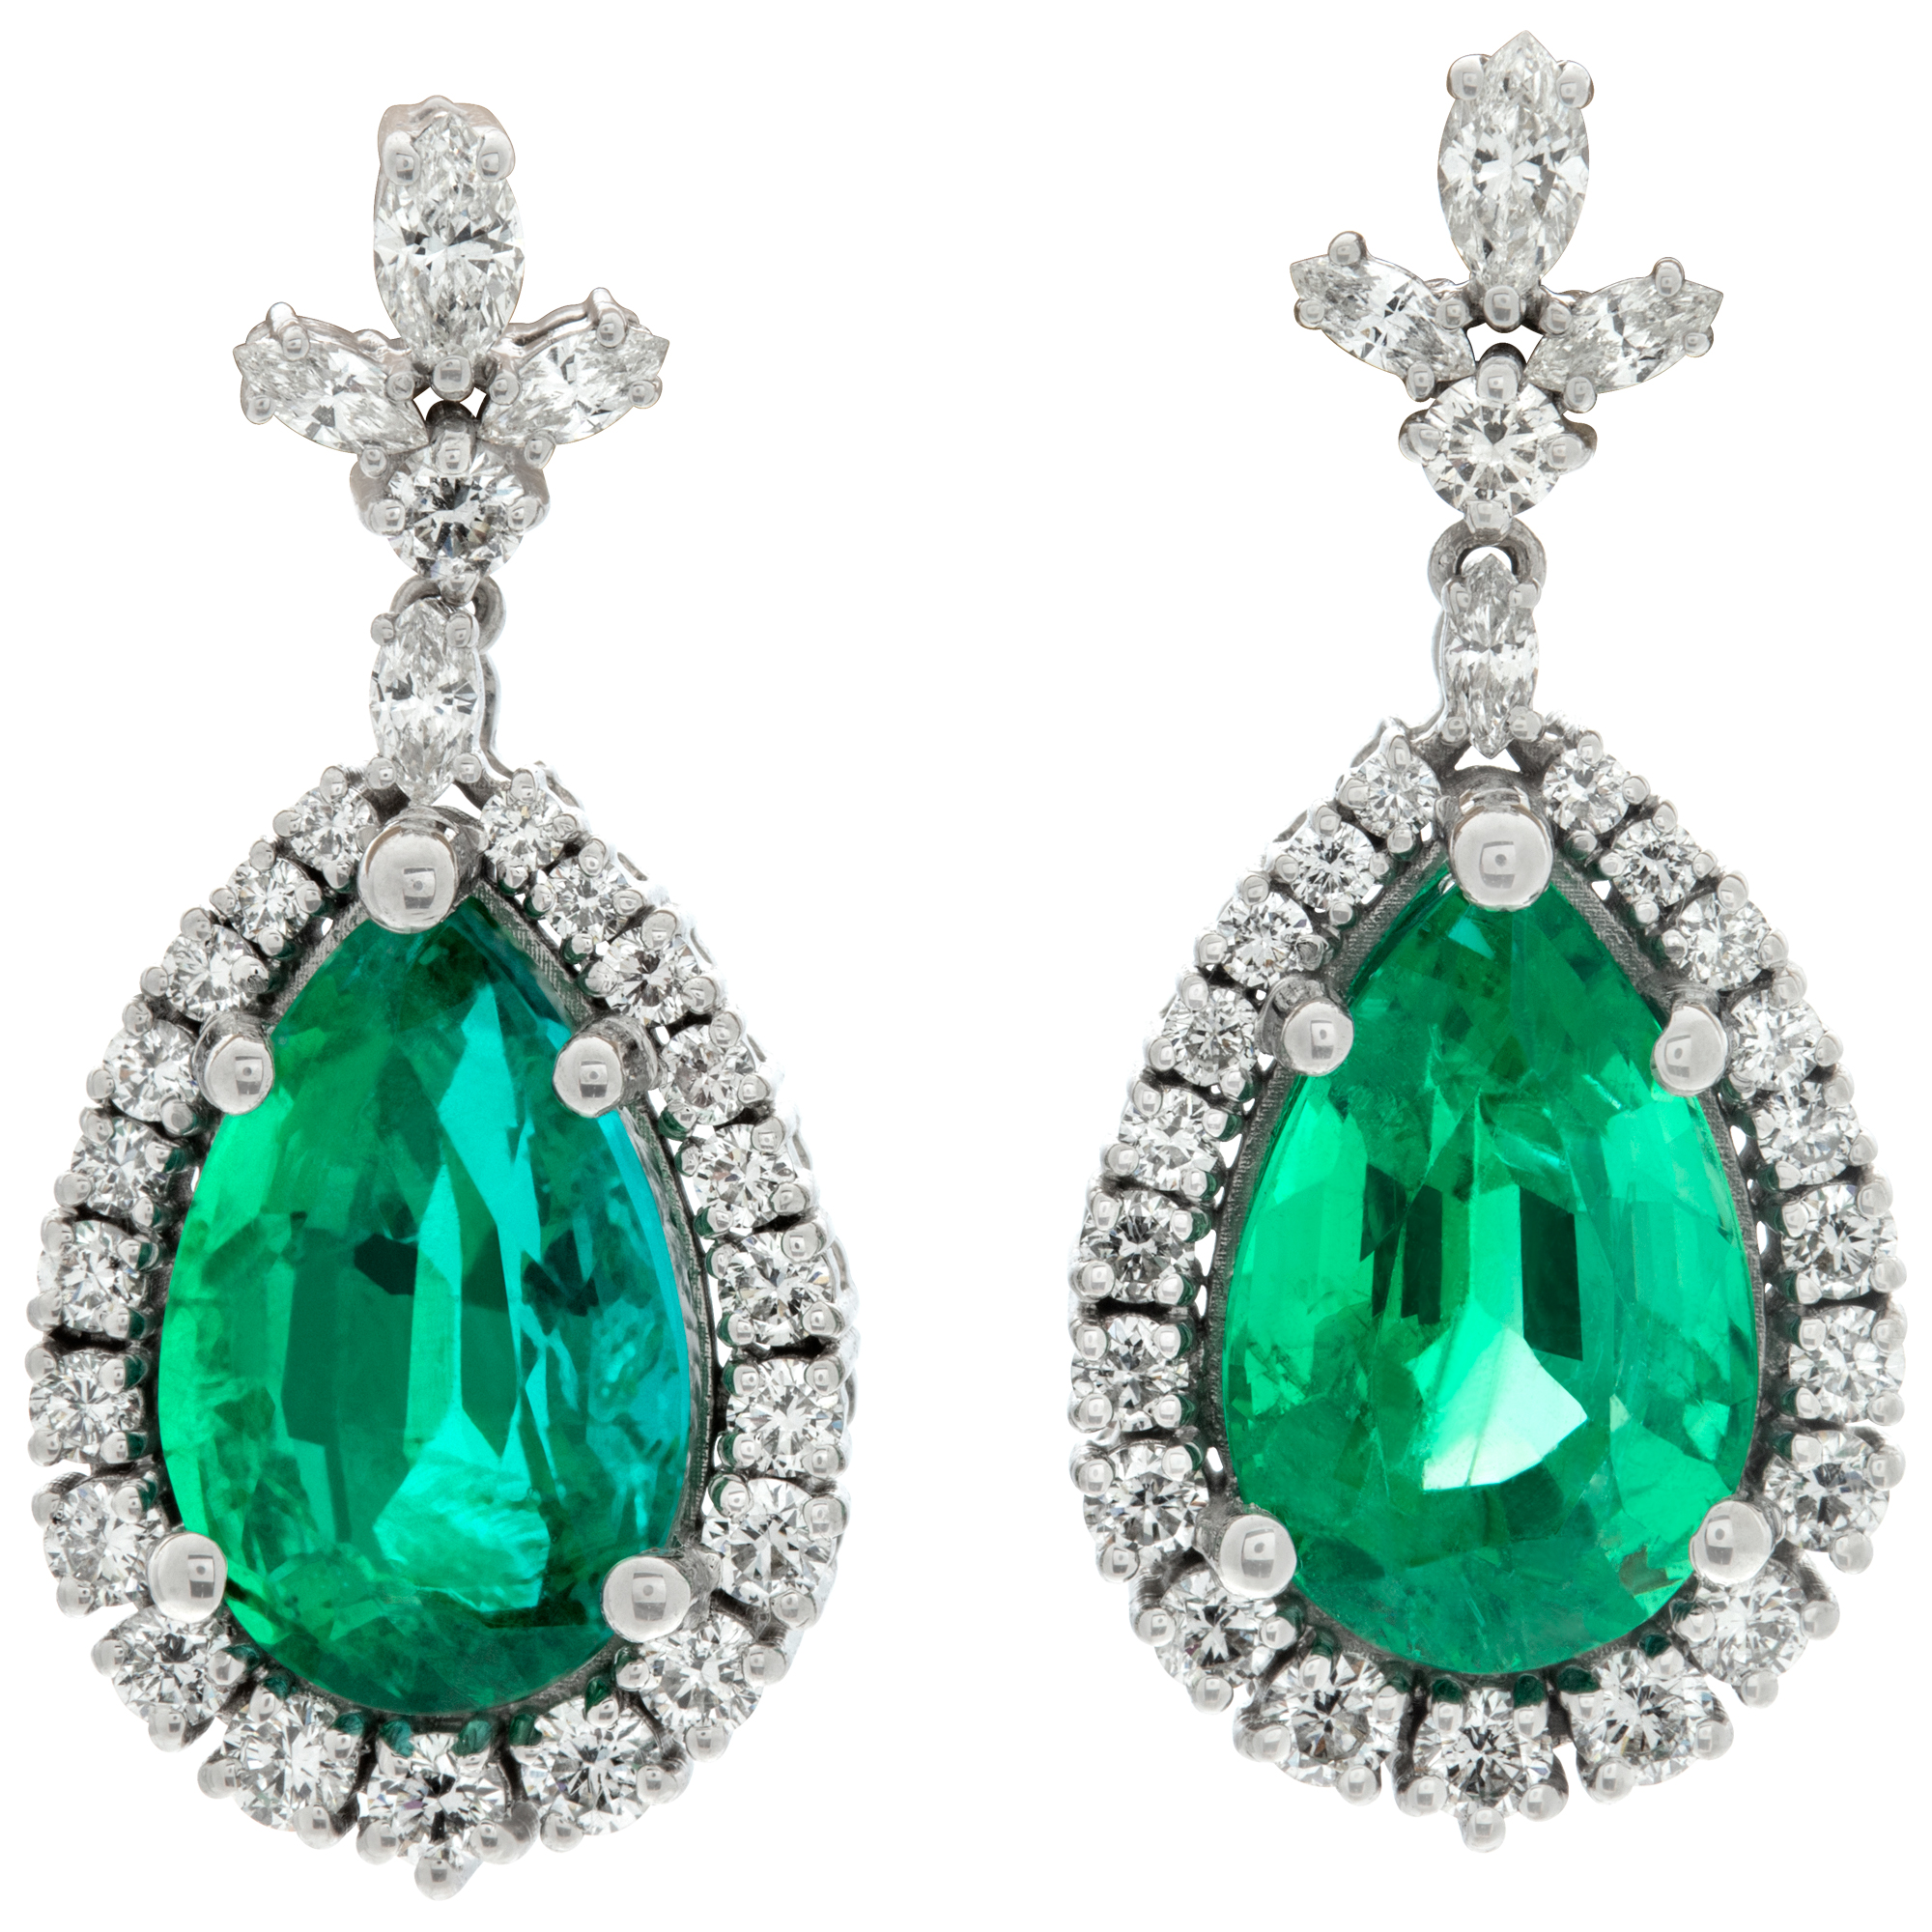 Emerald and diamond dangling earrings in 18k white gold